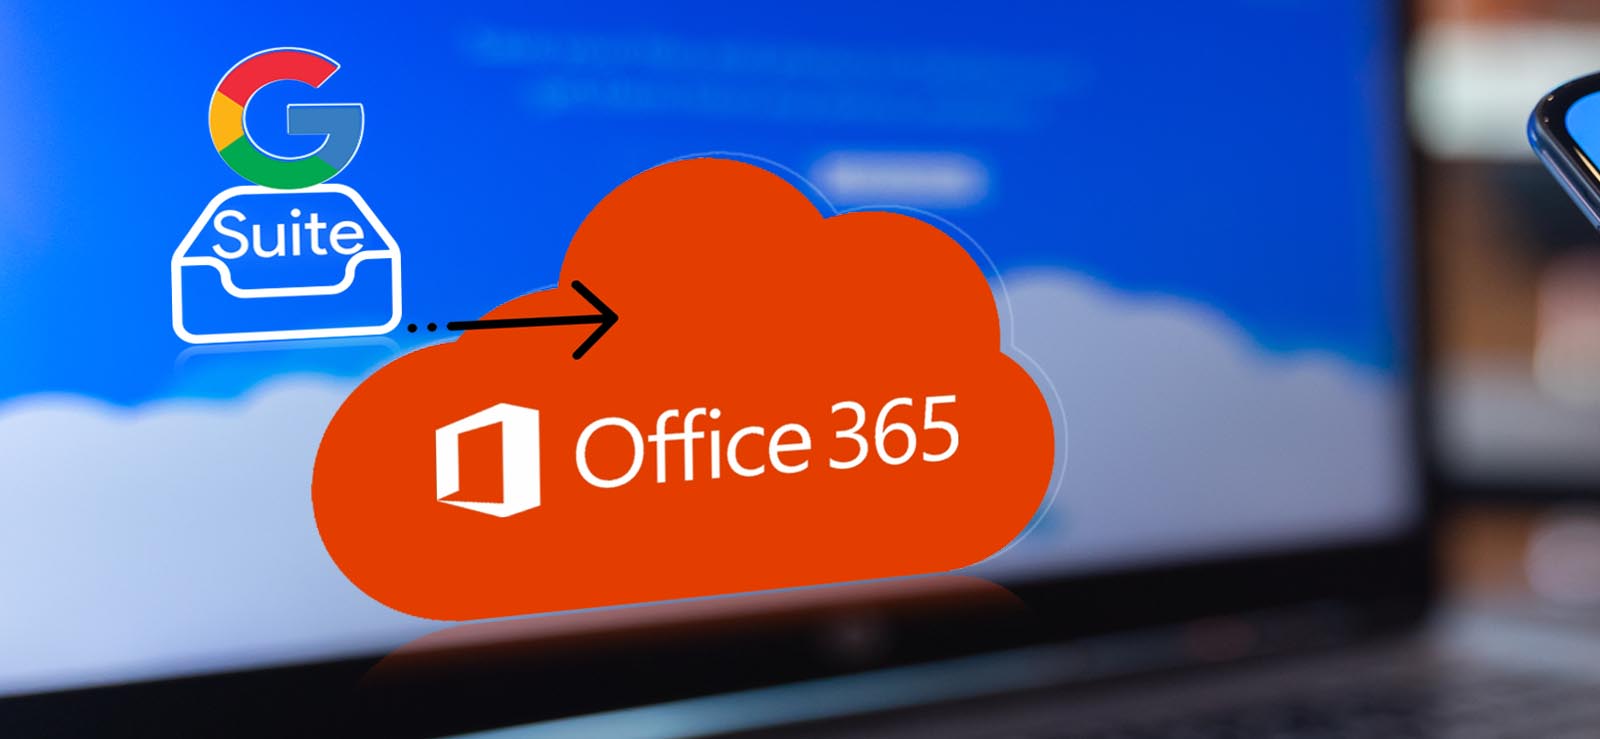 How to do G Suite to Office 365 Cutover Migration?